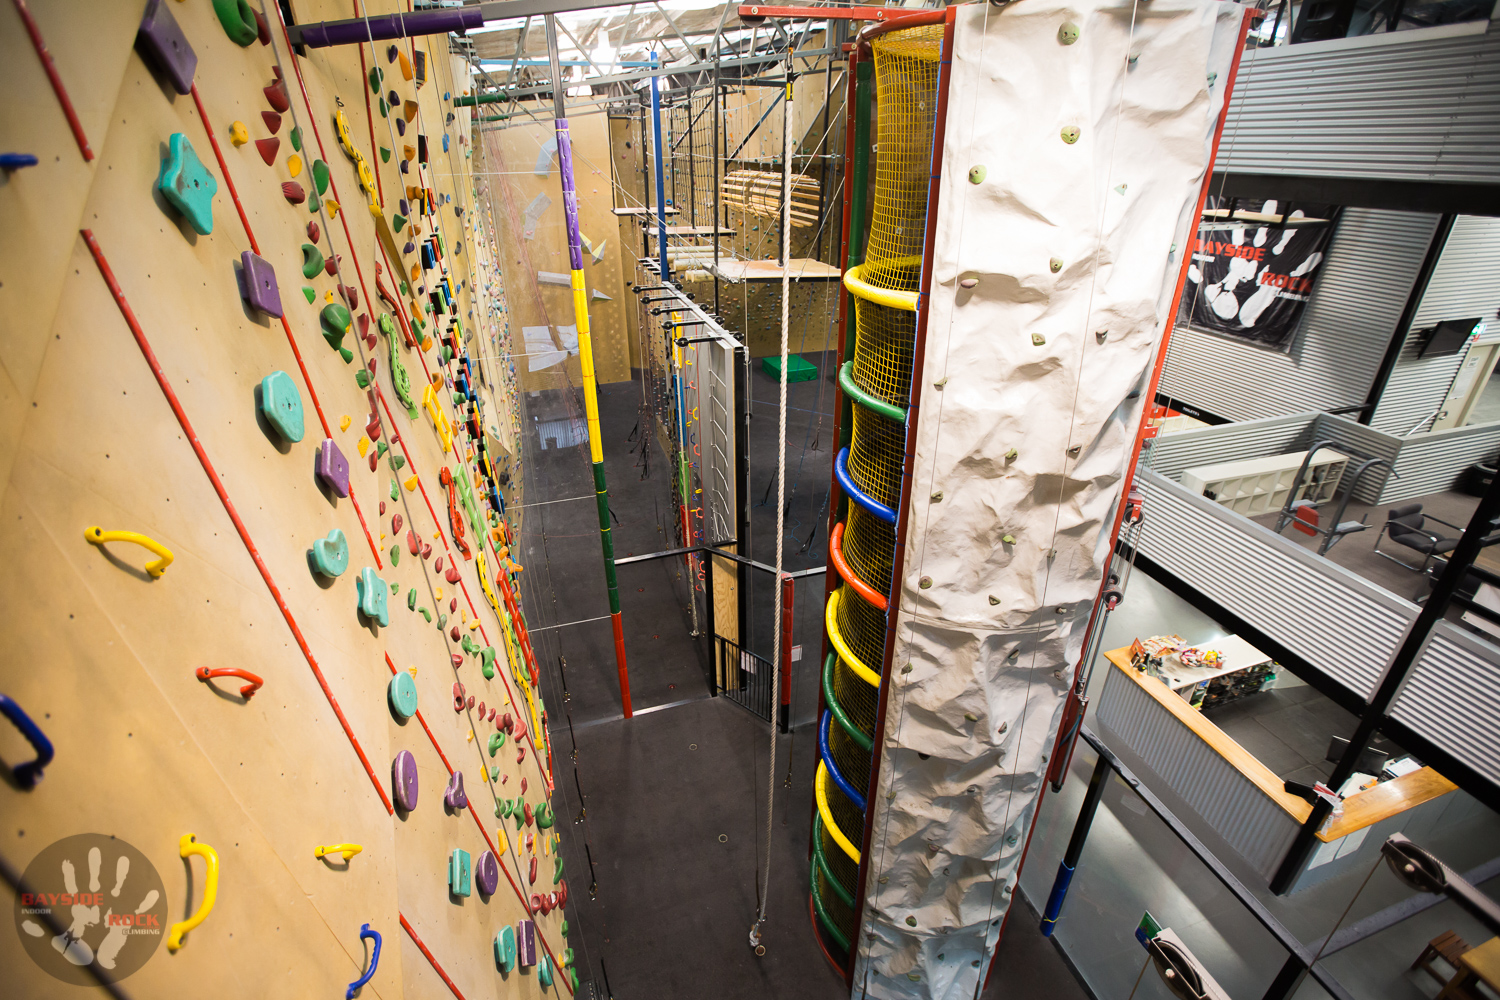 25 Climbing stations with plenty of challenges.